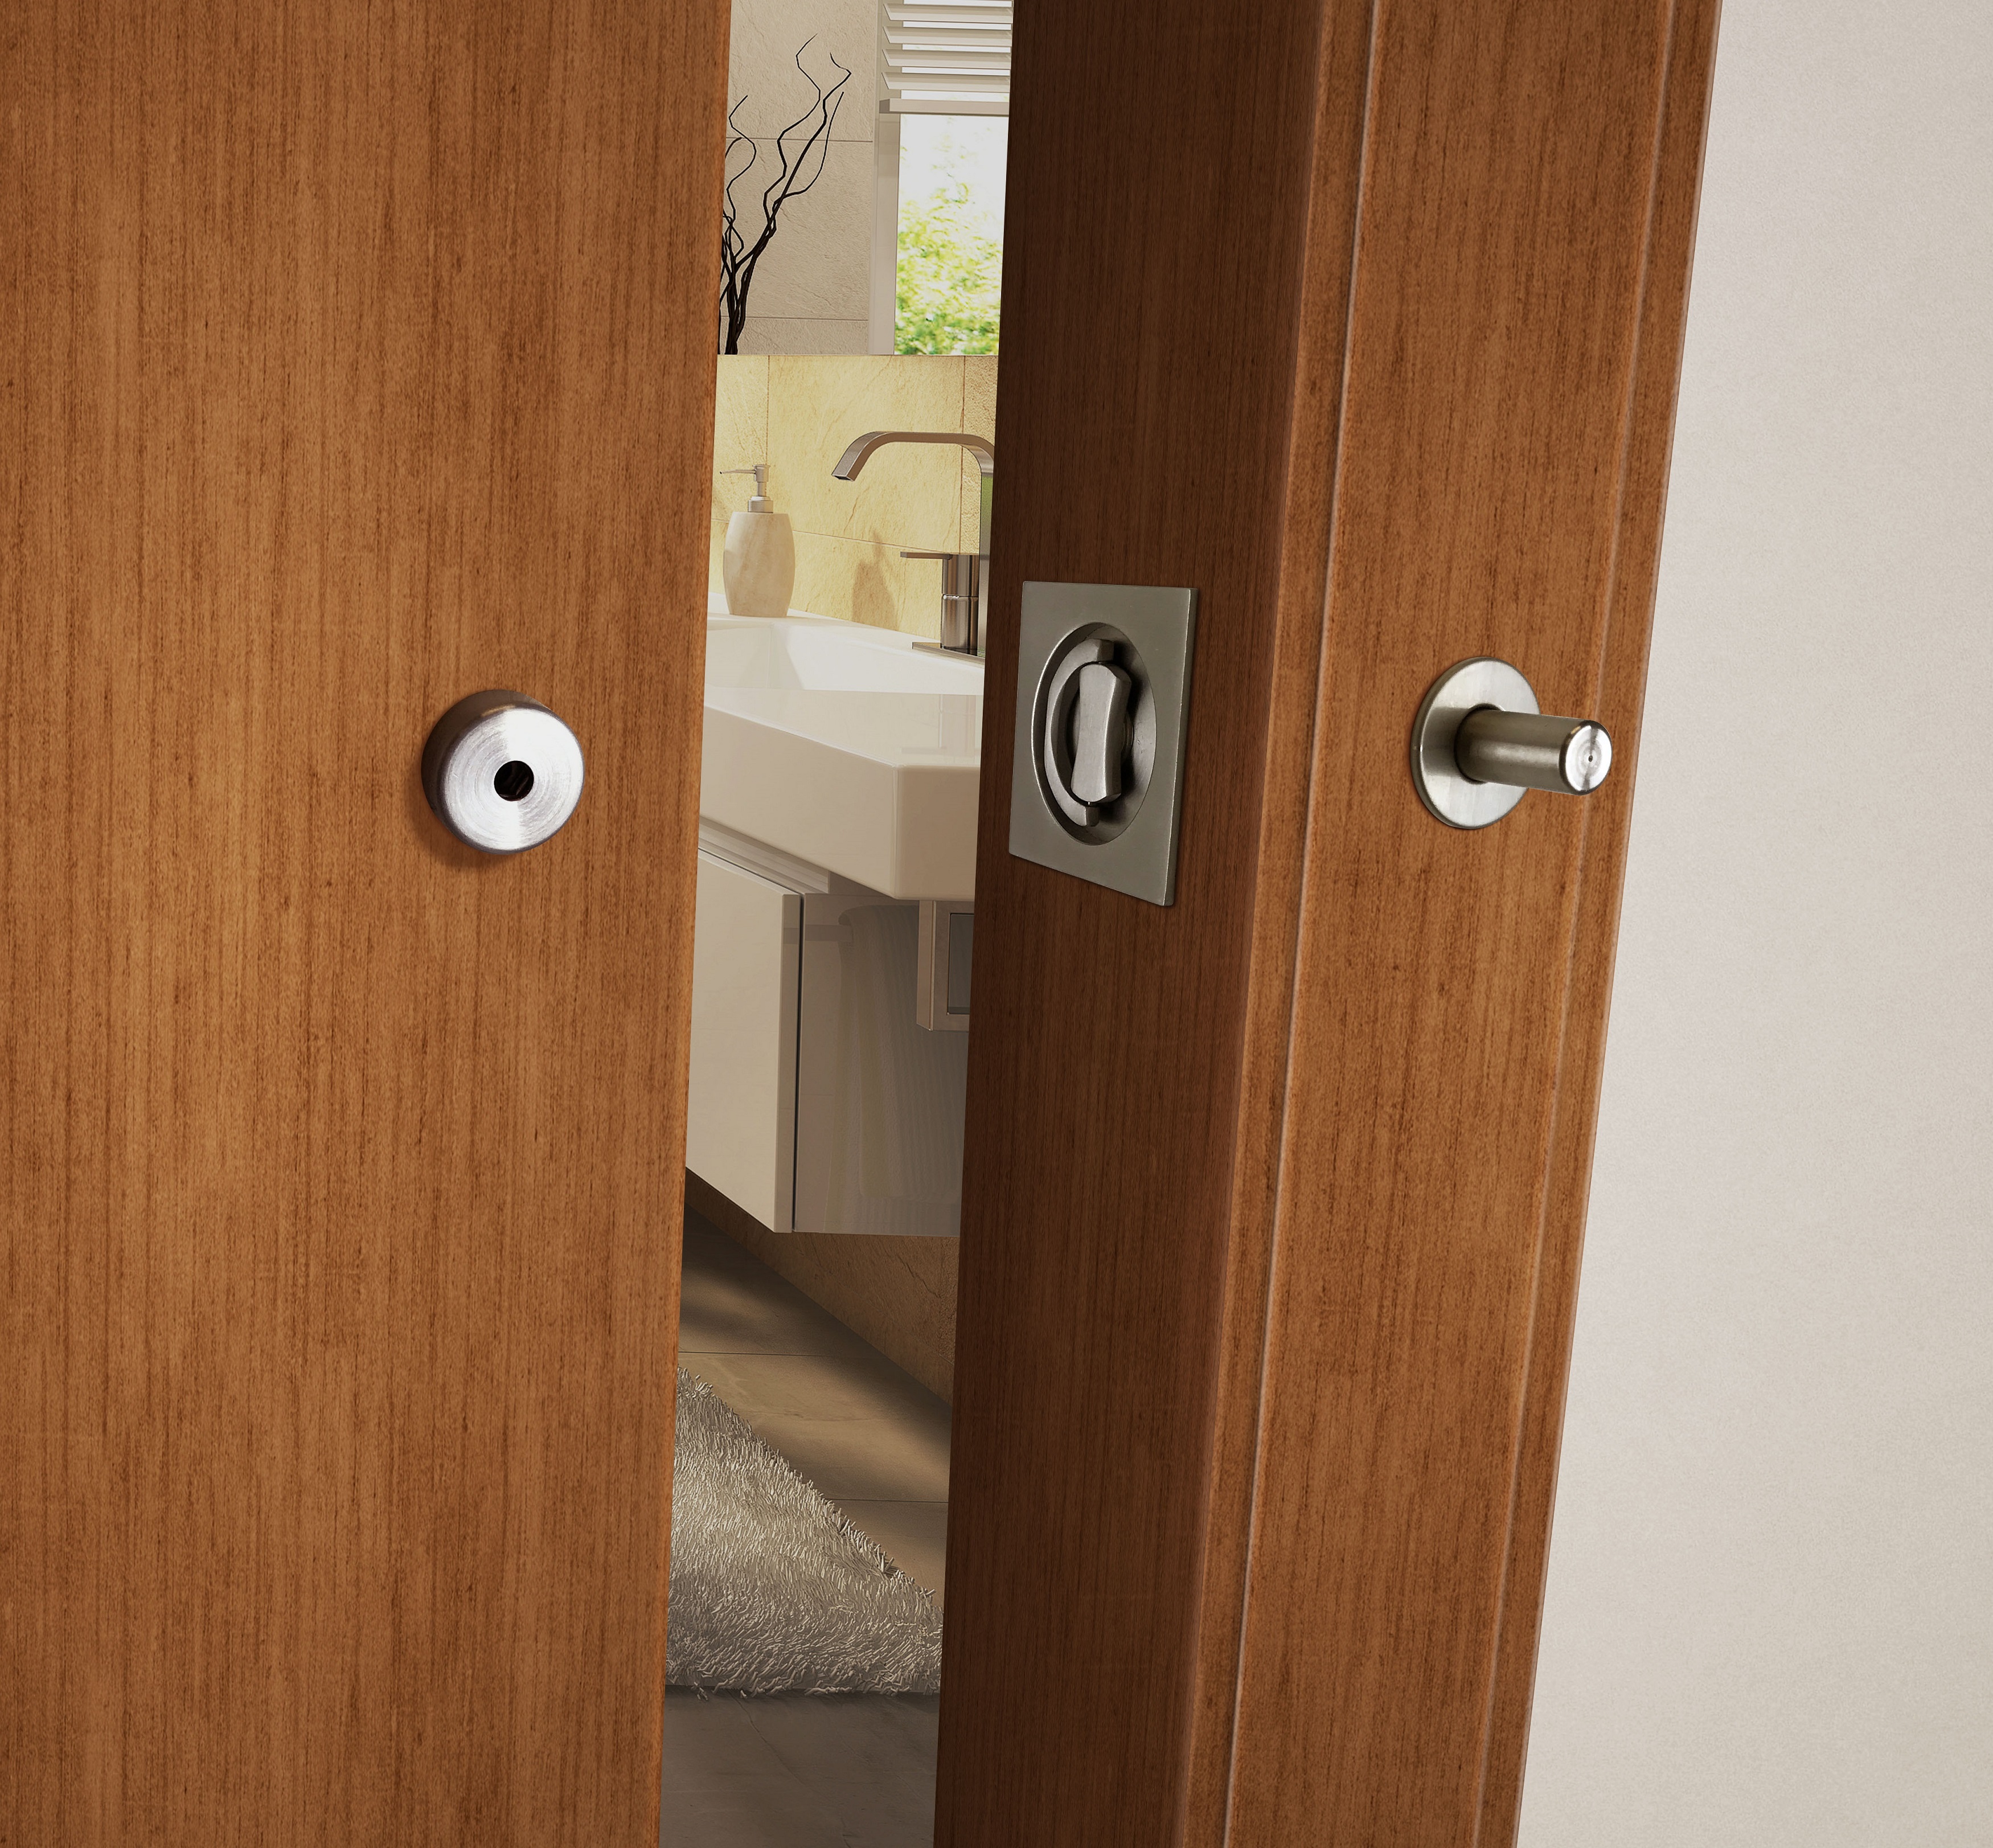 The INOX Barn Door Lock provides an easy-to-use thumb turn (with ADA options) that allows the barn door to be locked securely from inside the room. Shown in Satin Stainless Steel.